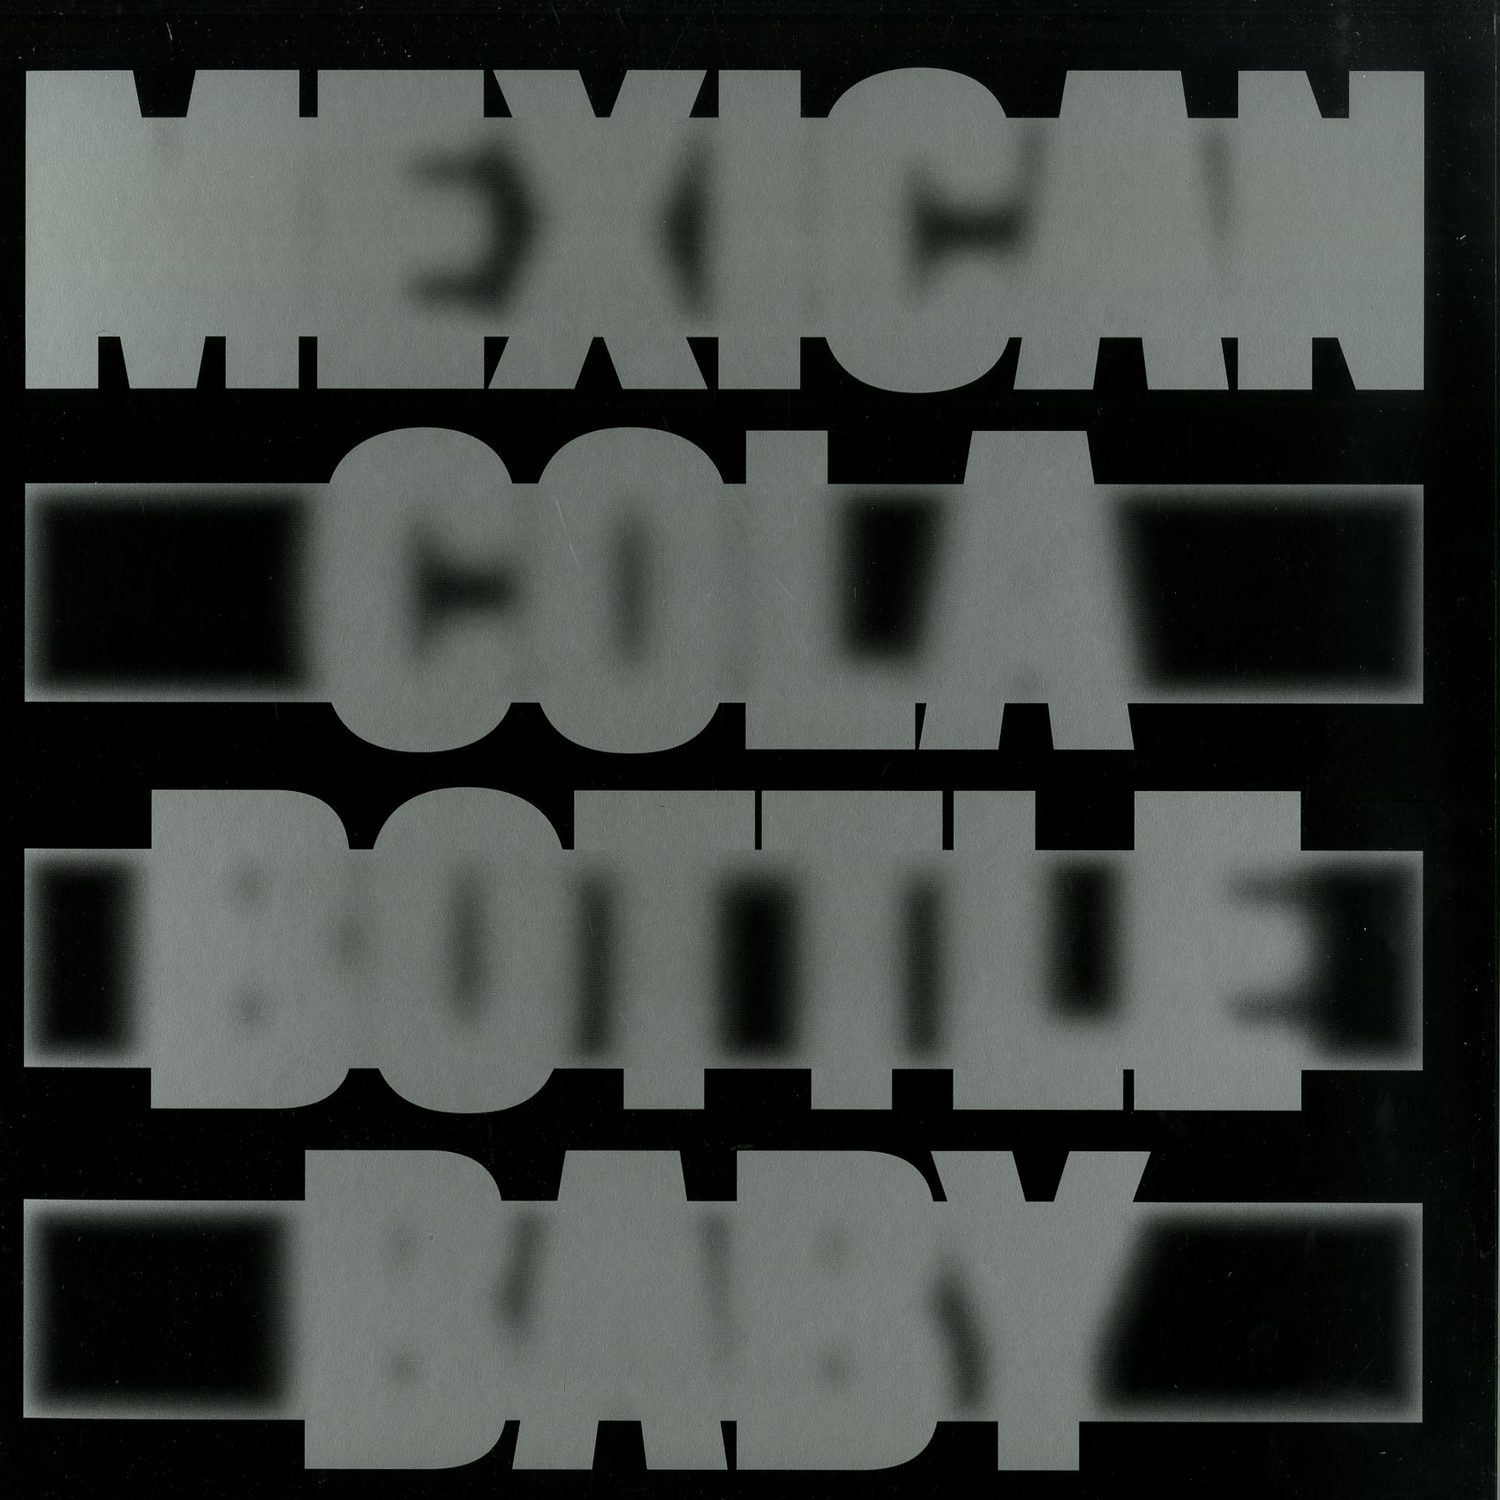 Moscoman - MEXICAN COLA BOTTLE BABY